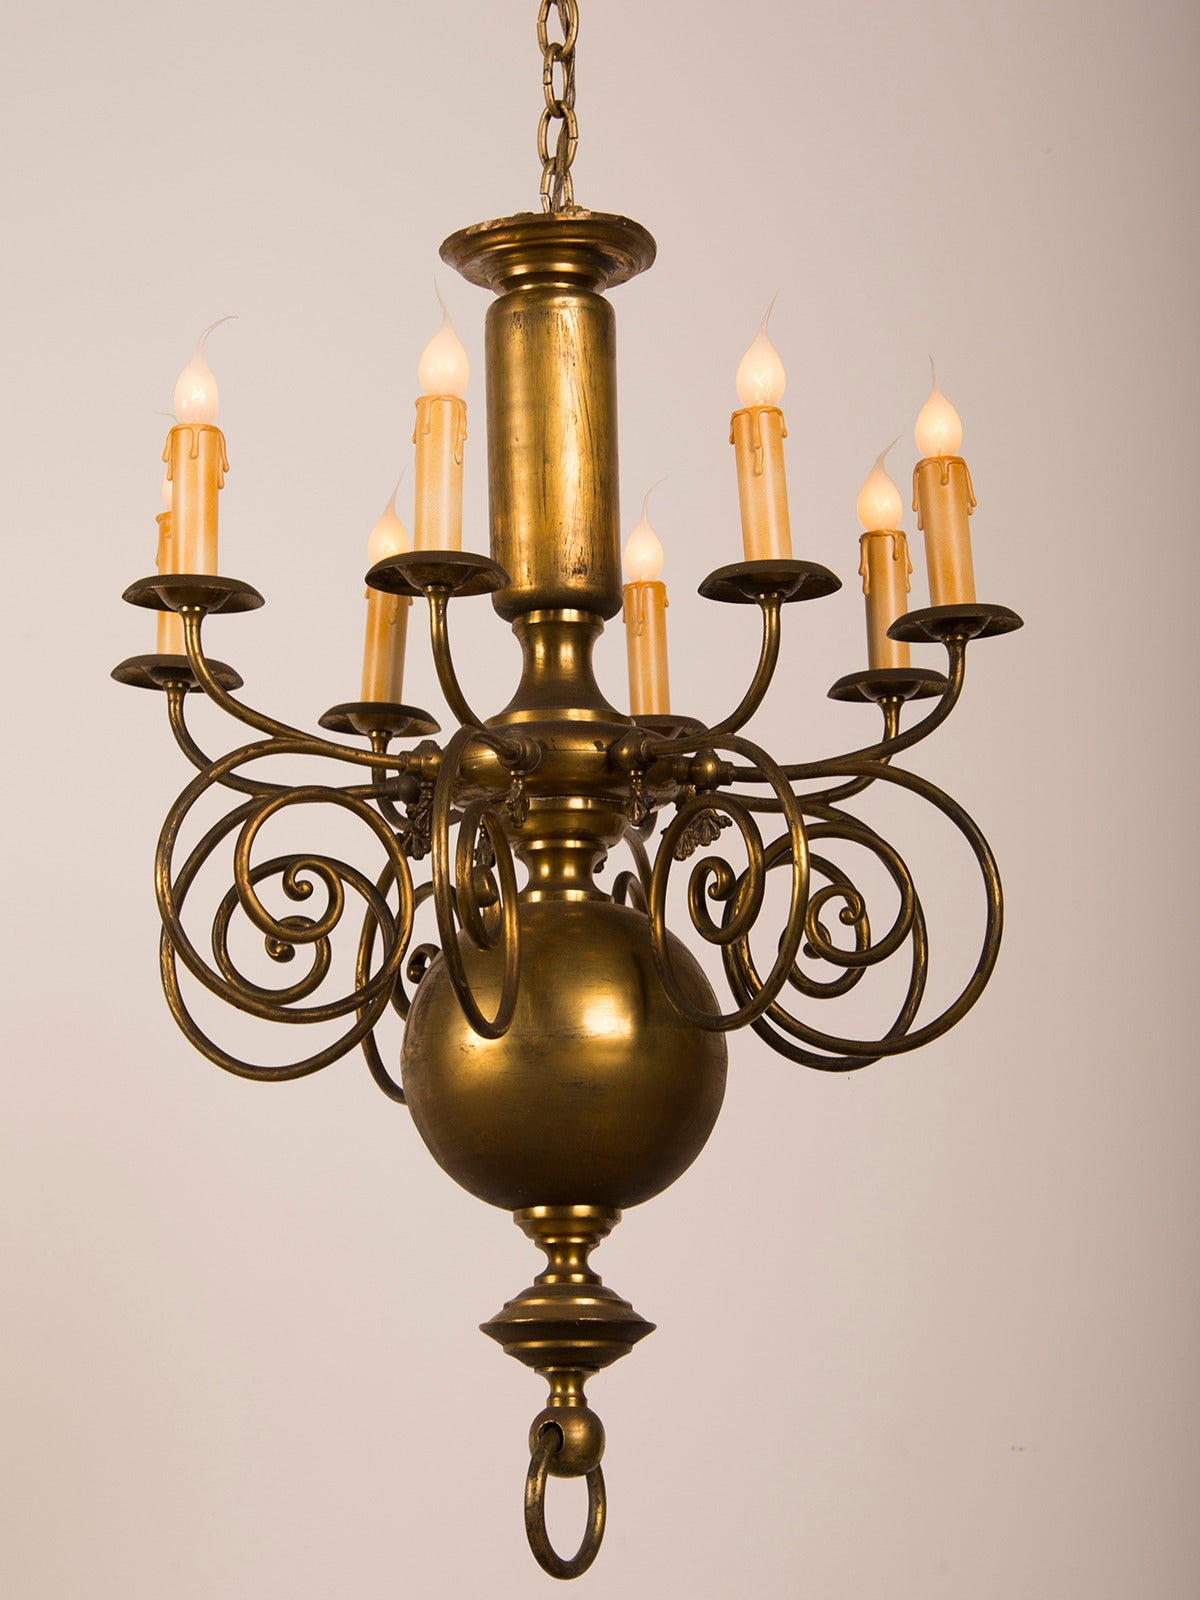 Receive our new selections direct from 1stdibs by email each week. Please click Follow Dealer below and see them first!

A tall and narrow antique Dutch brass chandelier circa 1900 having a substantial centre shaft with eight arms which scroll